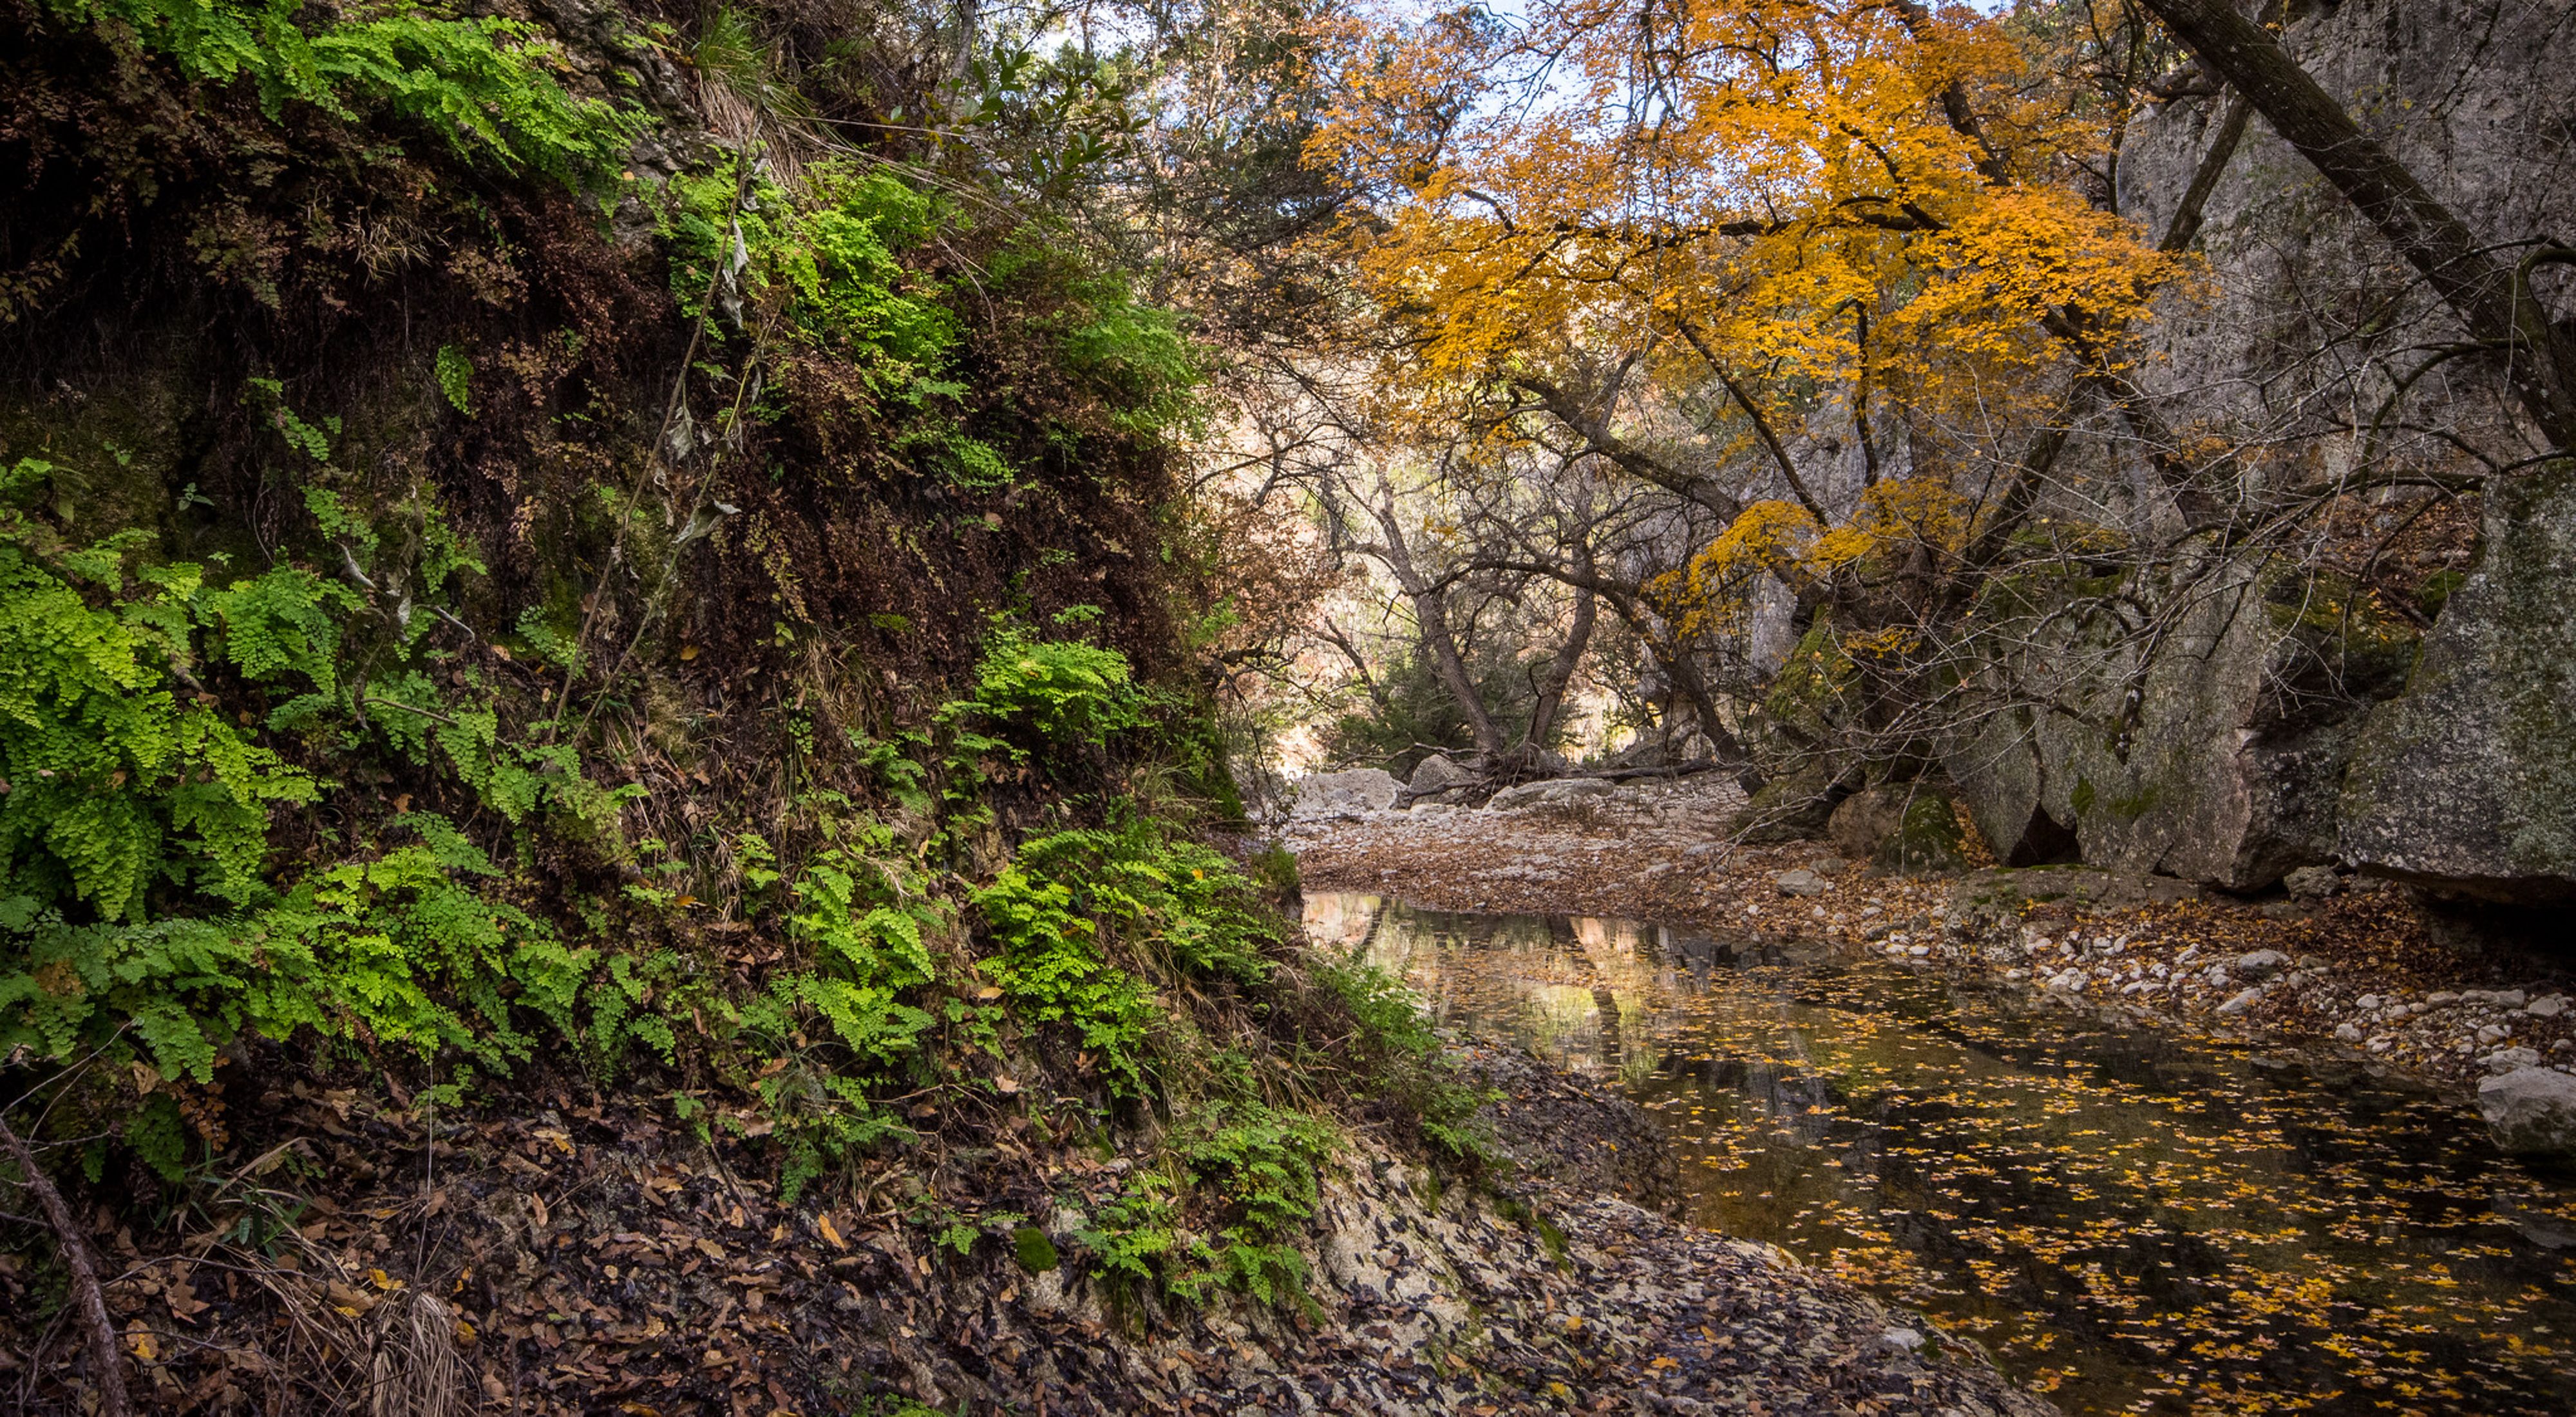 Orange and yellow leaves hang over a trickling, rocky creek as green moss and foliage grows on the edge of a limestone bluff nearby.